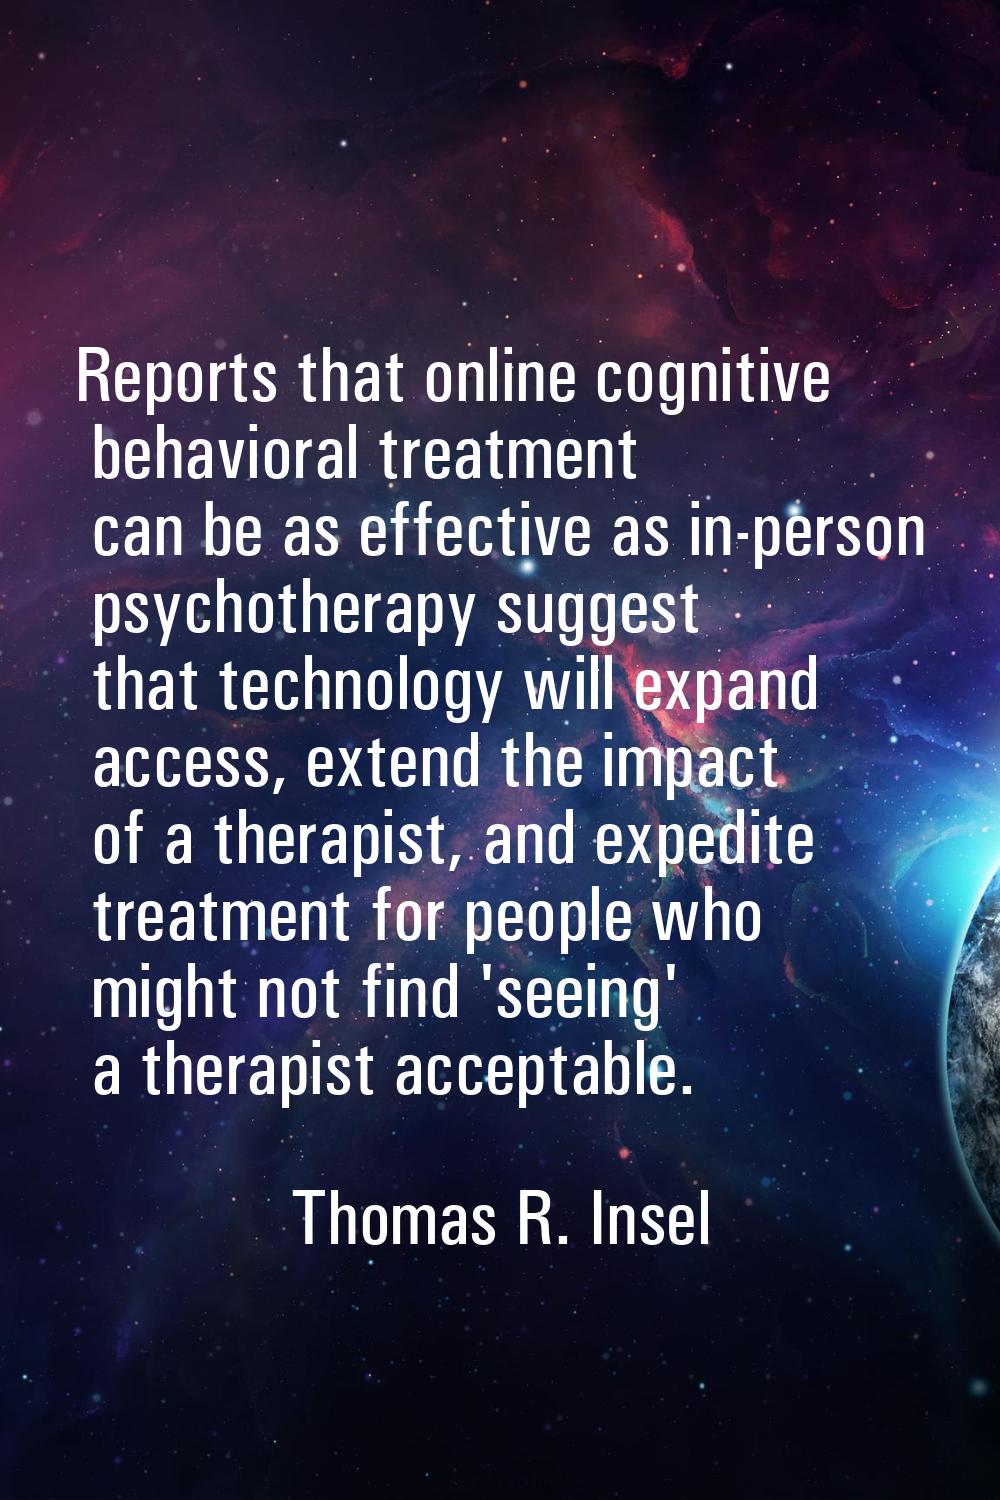 Reports that online cognitive behavioral treatment can be as effective as in-person psychotherapy s